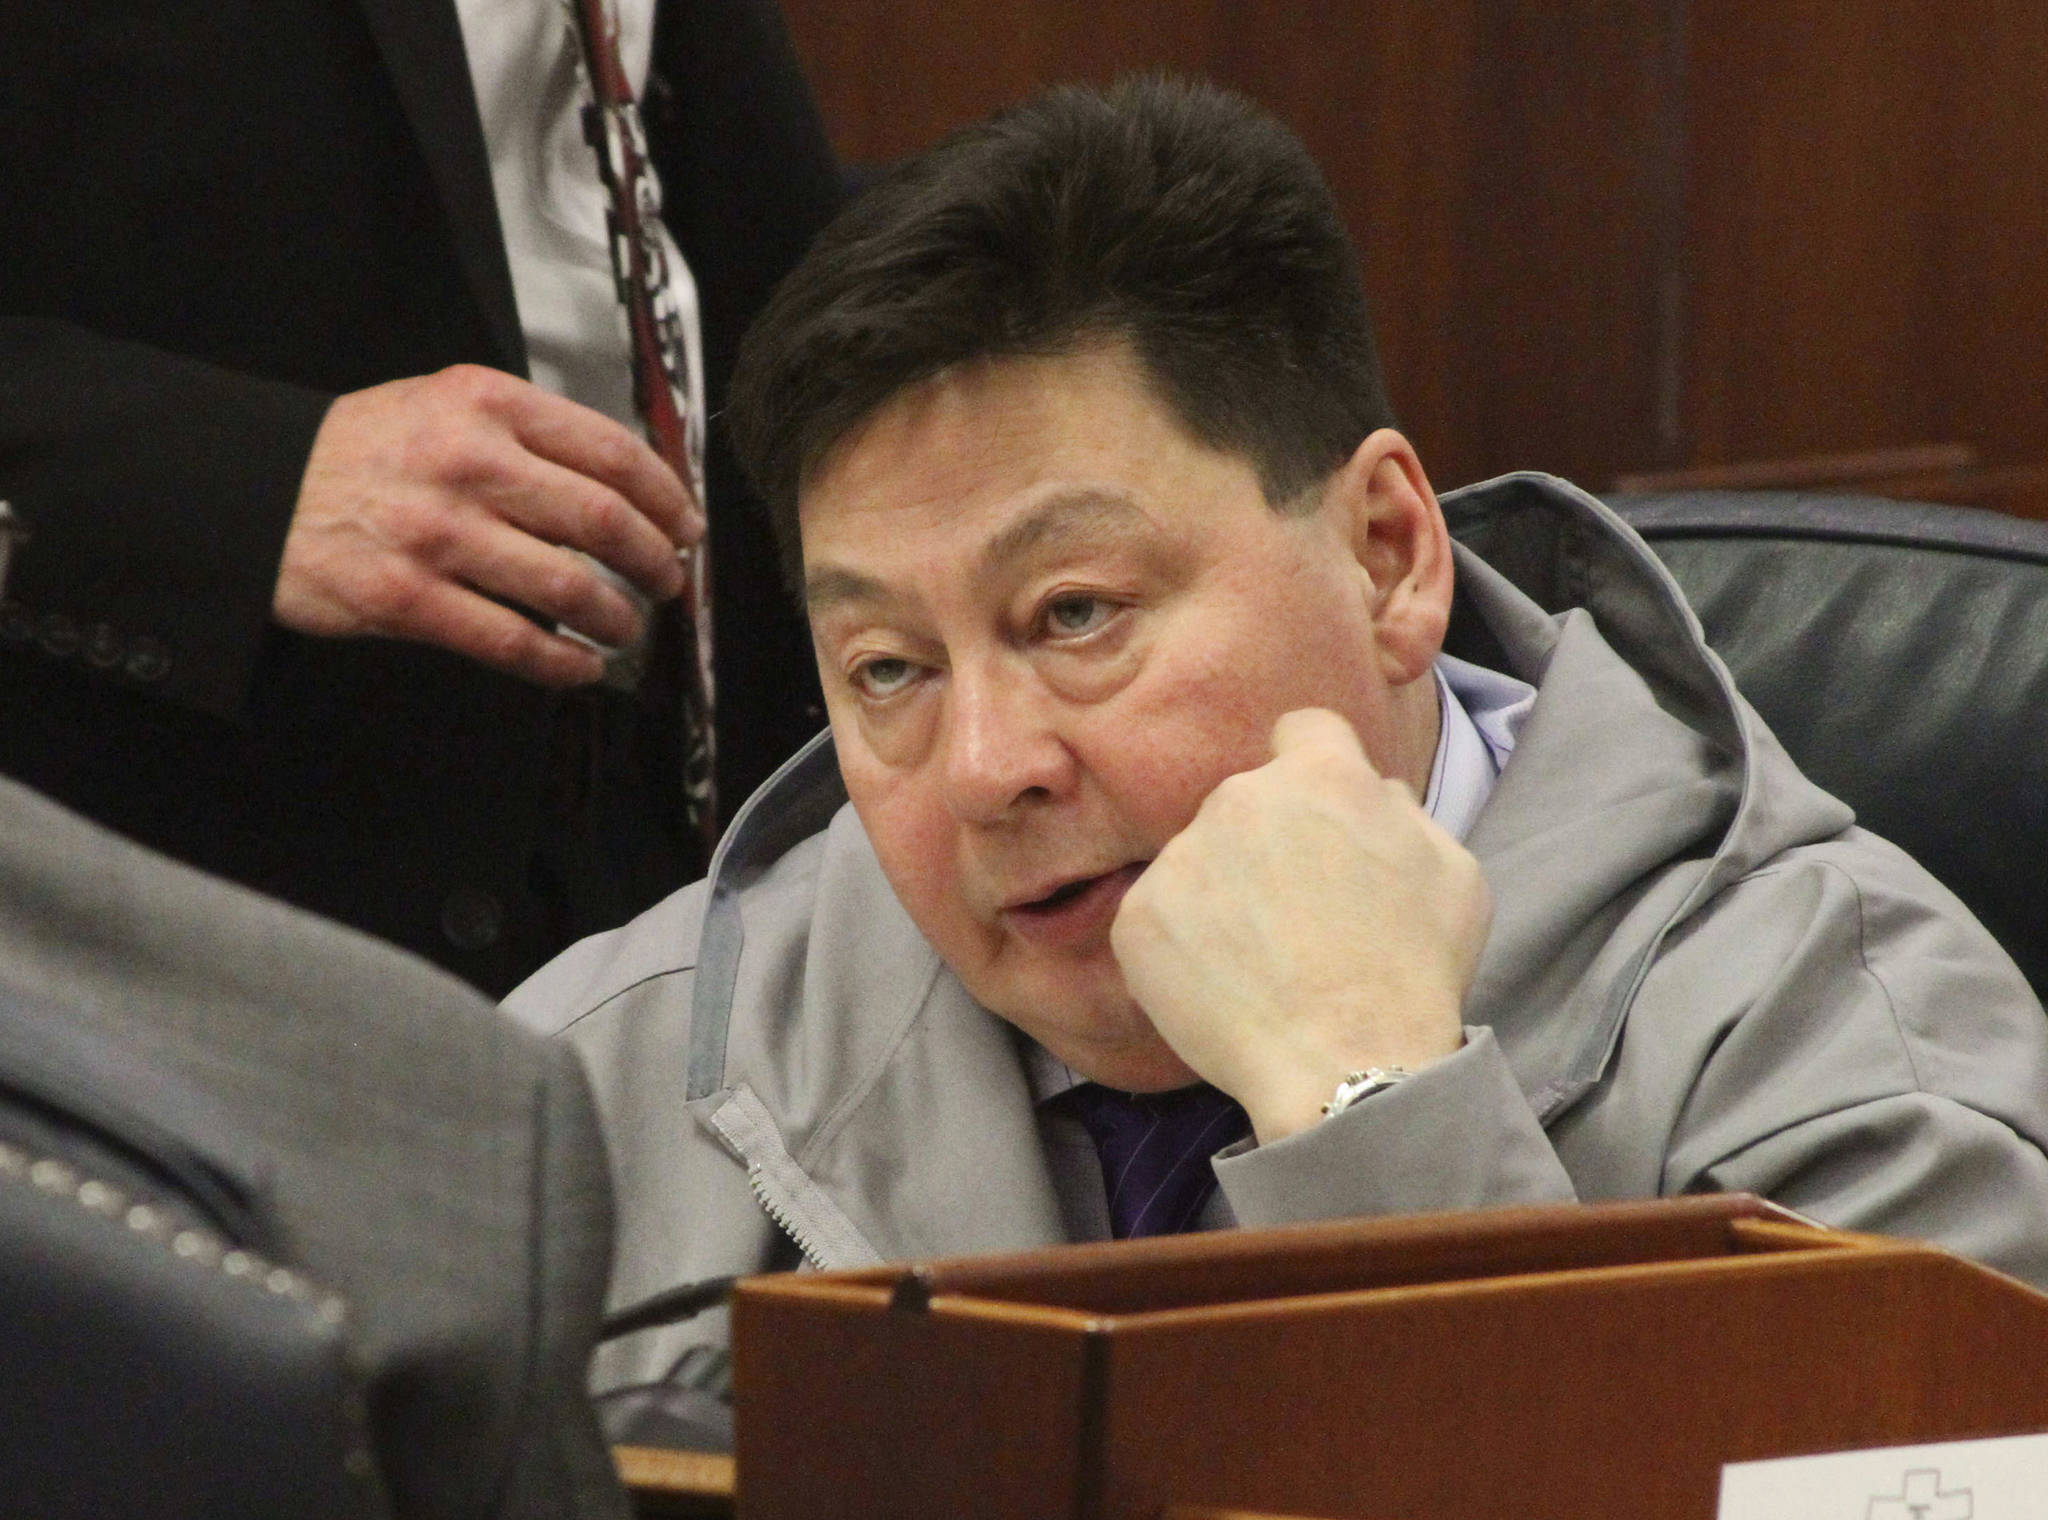 In this Jan. 17, 2017, file photo, state Rep. Dean Westlake, D-Kotzebue, talks with another legislator during a break in the opening session of the Alaska Legislature in Juneau, Alaska. The Alaska Legislature opens a new session Tuesday, Jan. 16, 2018, amid lingering fallout from the resignation of Westlake, accused of inappropriate behavior toward female aides. (AP Photo/Mark Thiessen, File)